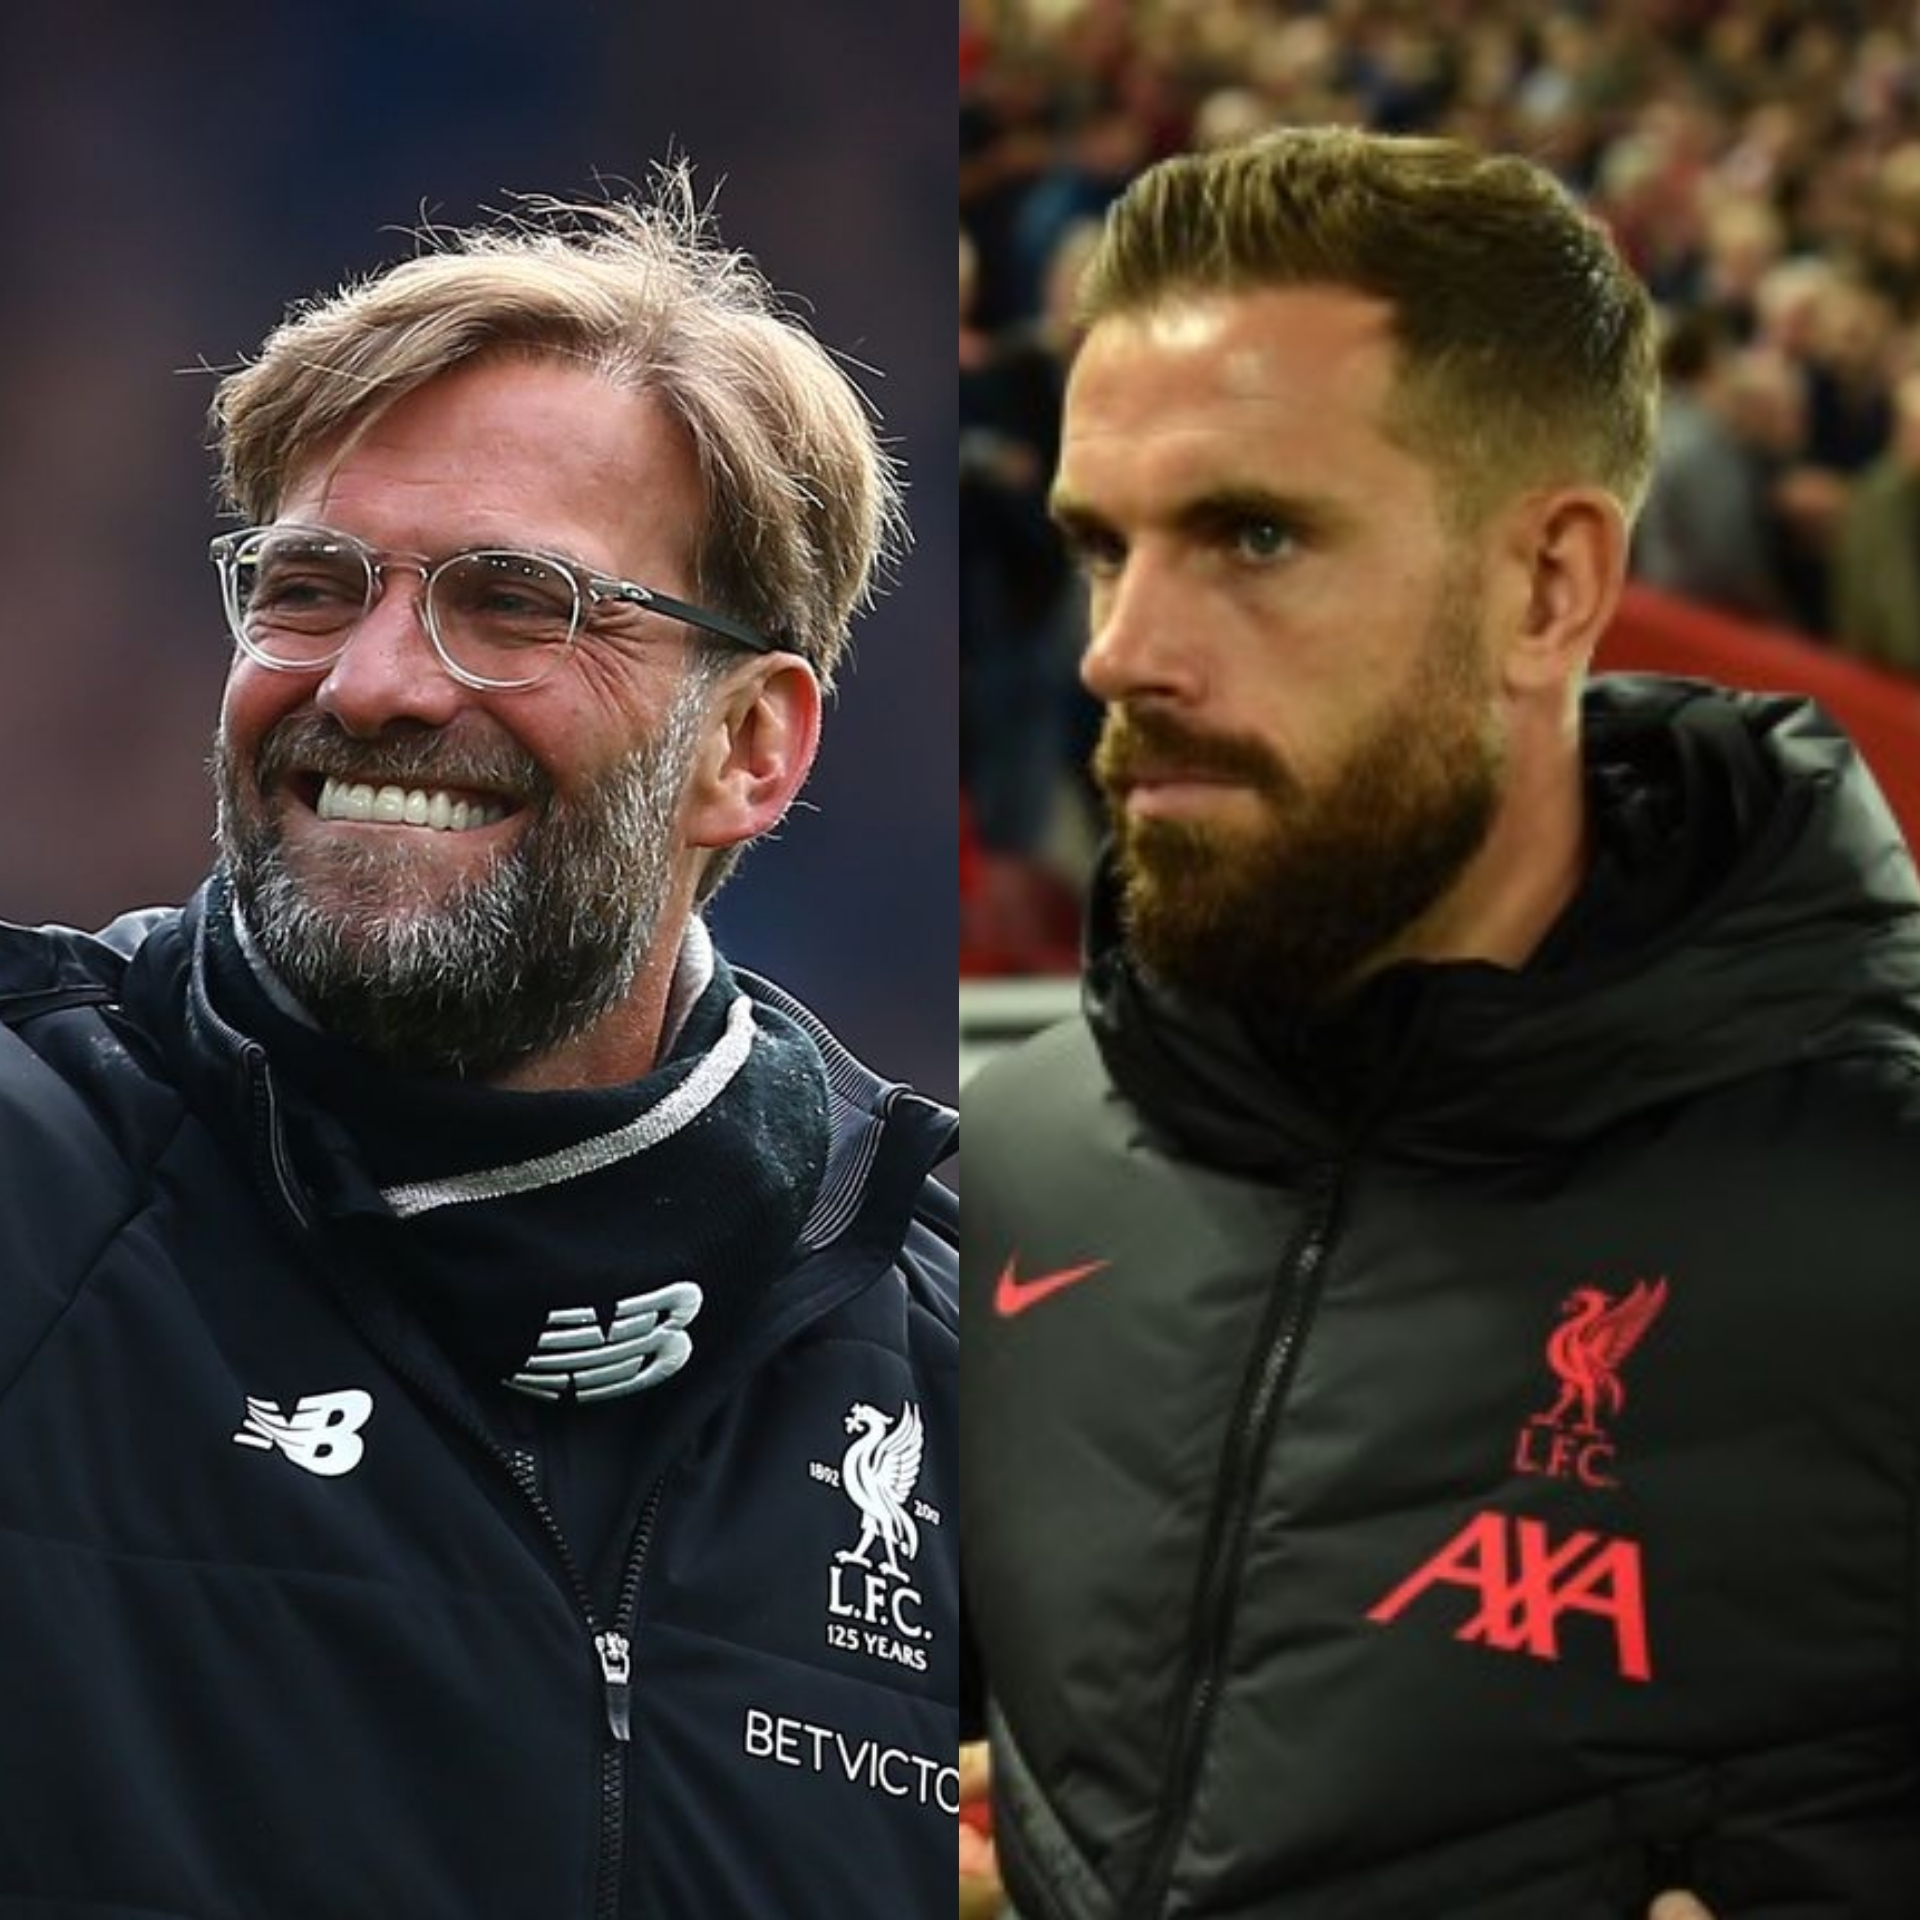 Jurgen Klopp ‘gives blessing’ for Jordan Henderson to join up with England squad